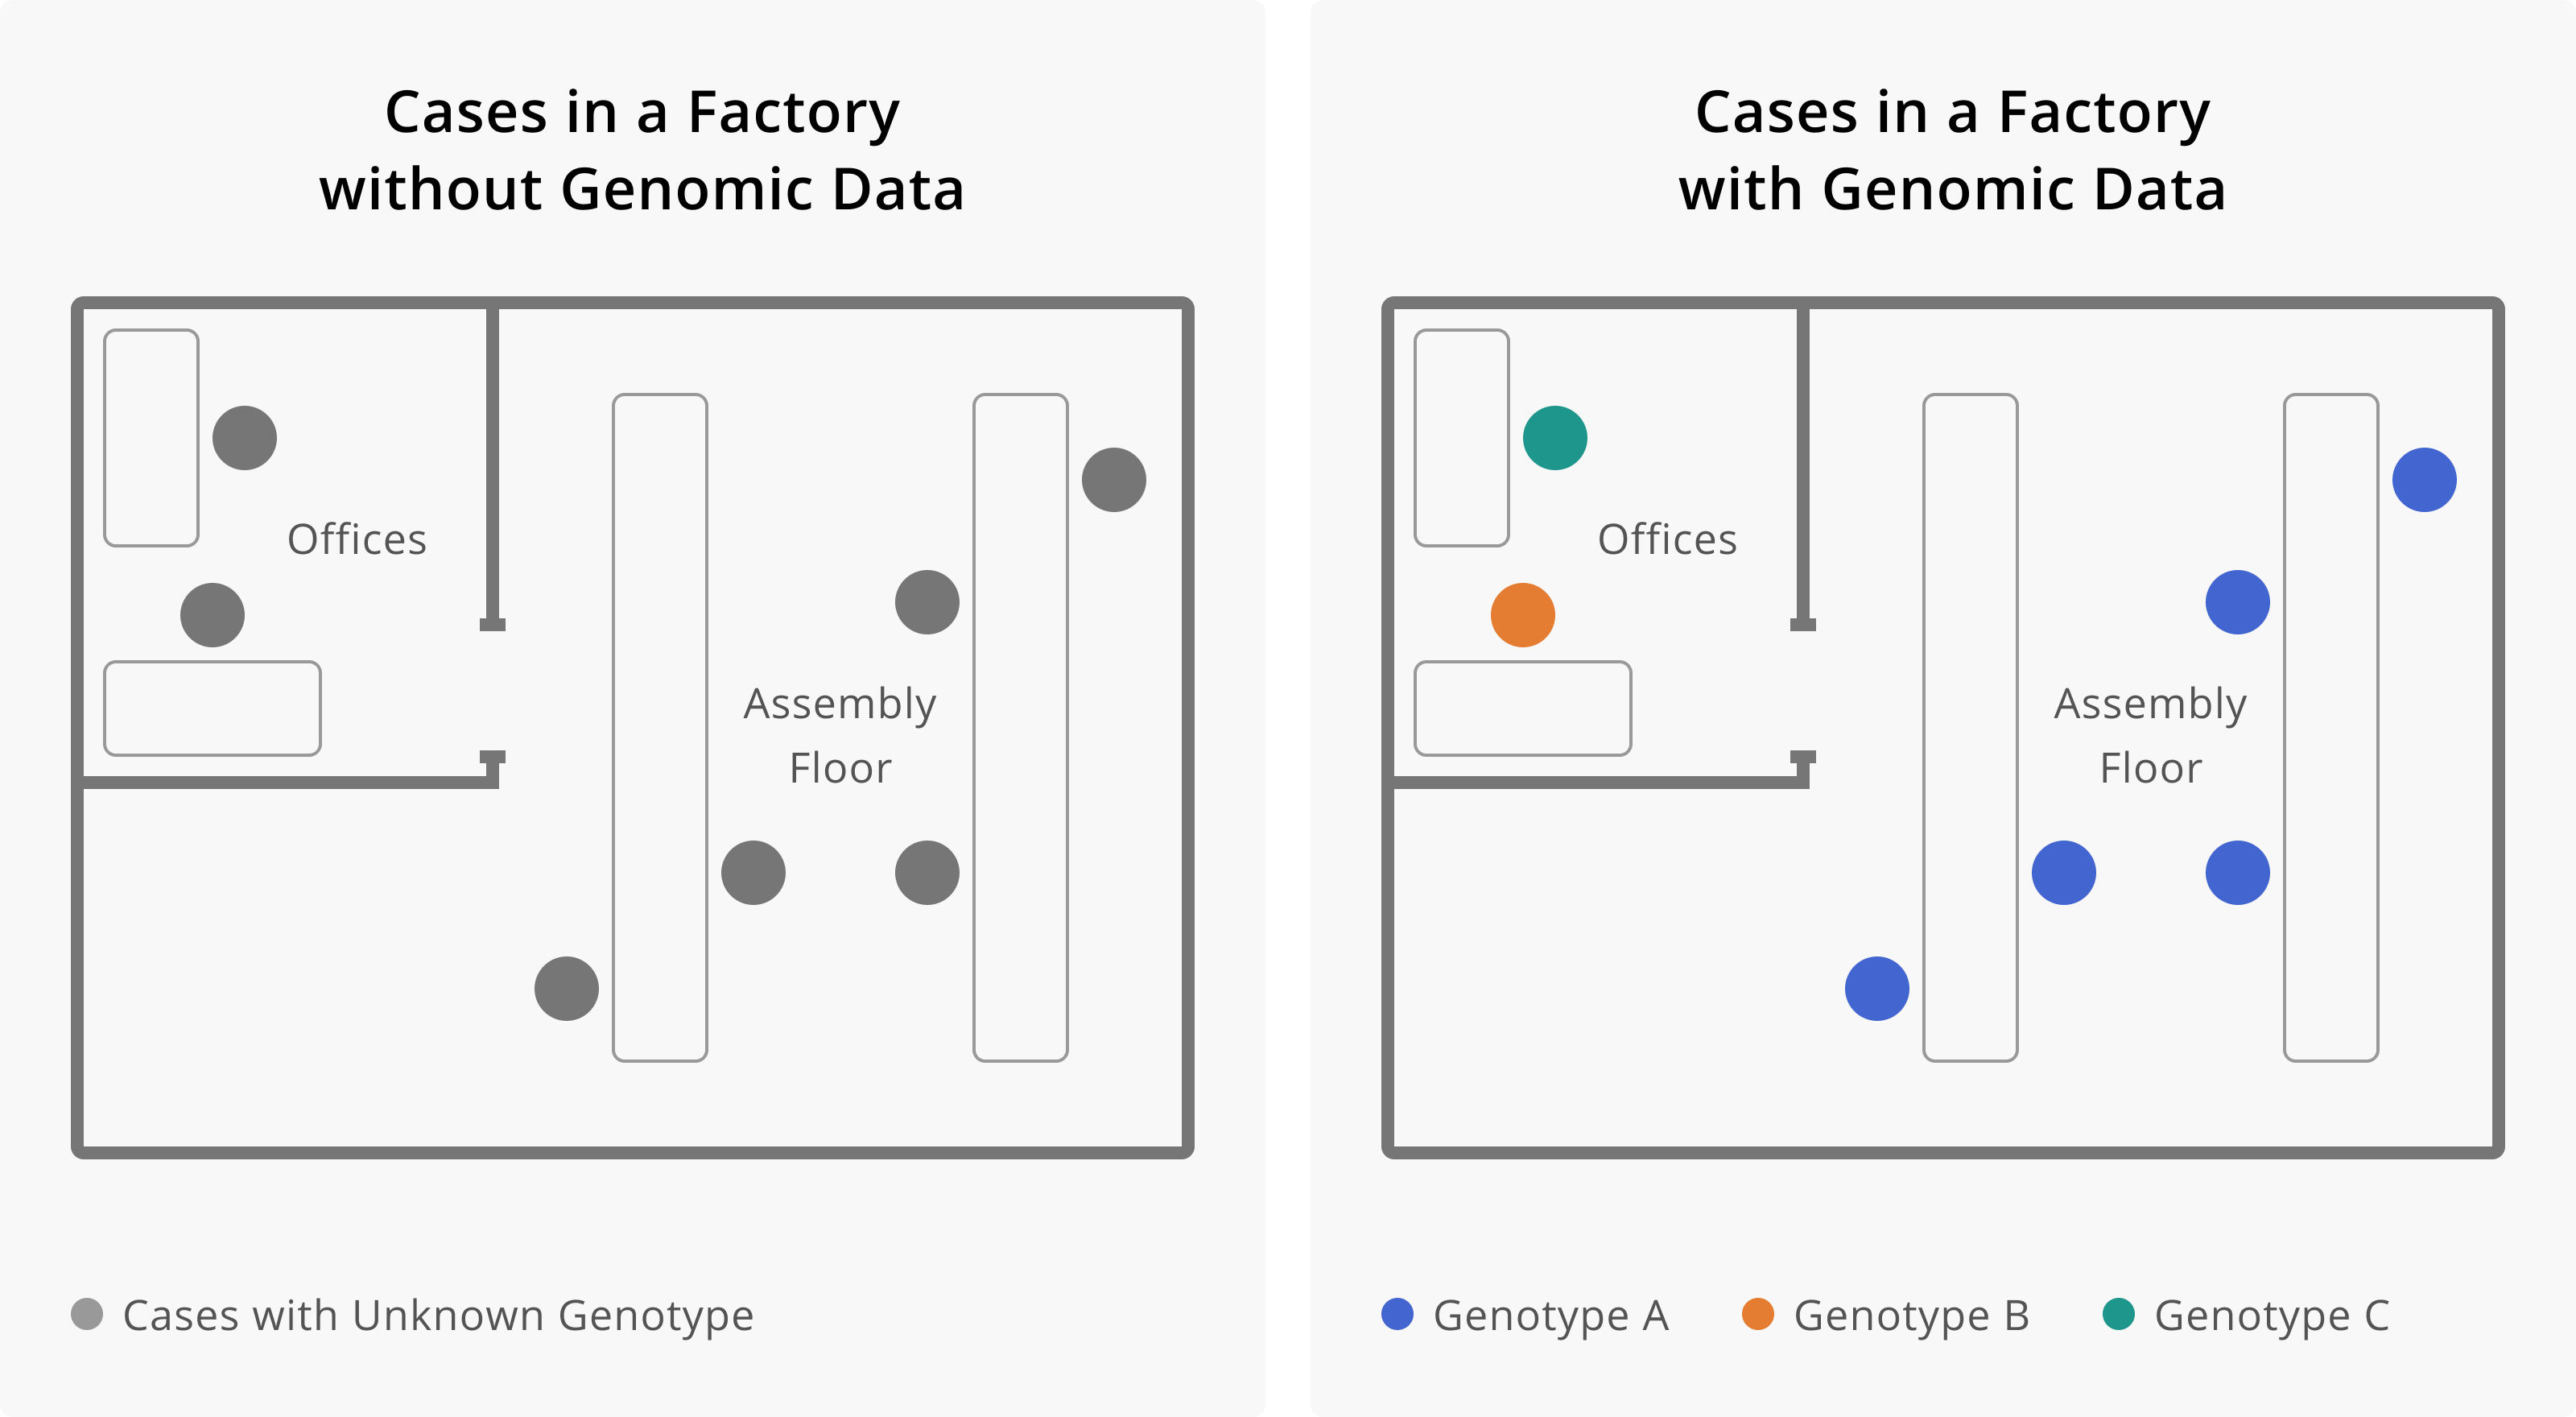 Here we see how the addition of genomic data changes our understanding of transmission within a factory. On the left, we see seven cases of infection, all within the same factory. This may lead us to believe that all of these cases are related, and perhaps became infected at work. The addition of genomic data helps us resolve this picture more. Once we have genotype information, we see that cases that work on the assembly floor all appear related, while cases among individuals who work in the offices appear unrelated, and are likely prevalent cases detected through enhanced surveillance efforts. Determining that workers in the office are not part of the factory outbreak helps us see that the occupational transmission risk appears related to work on the assembly line. This would allow us to target our intervention efforts towards this group of workers.